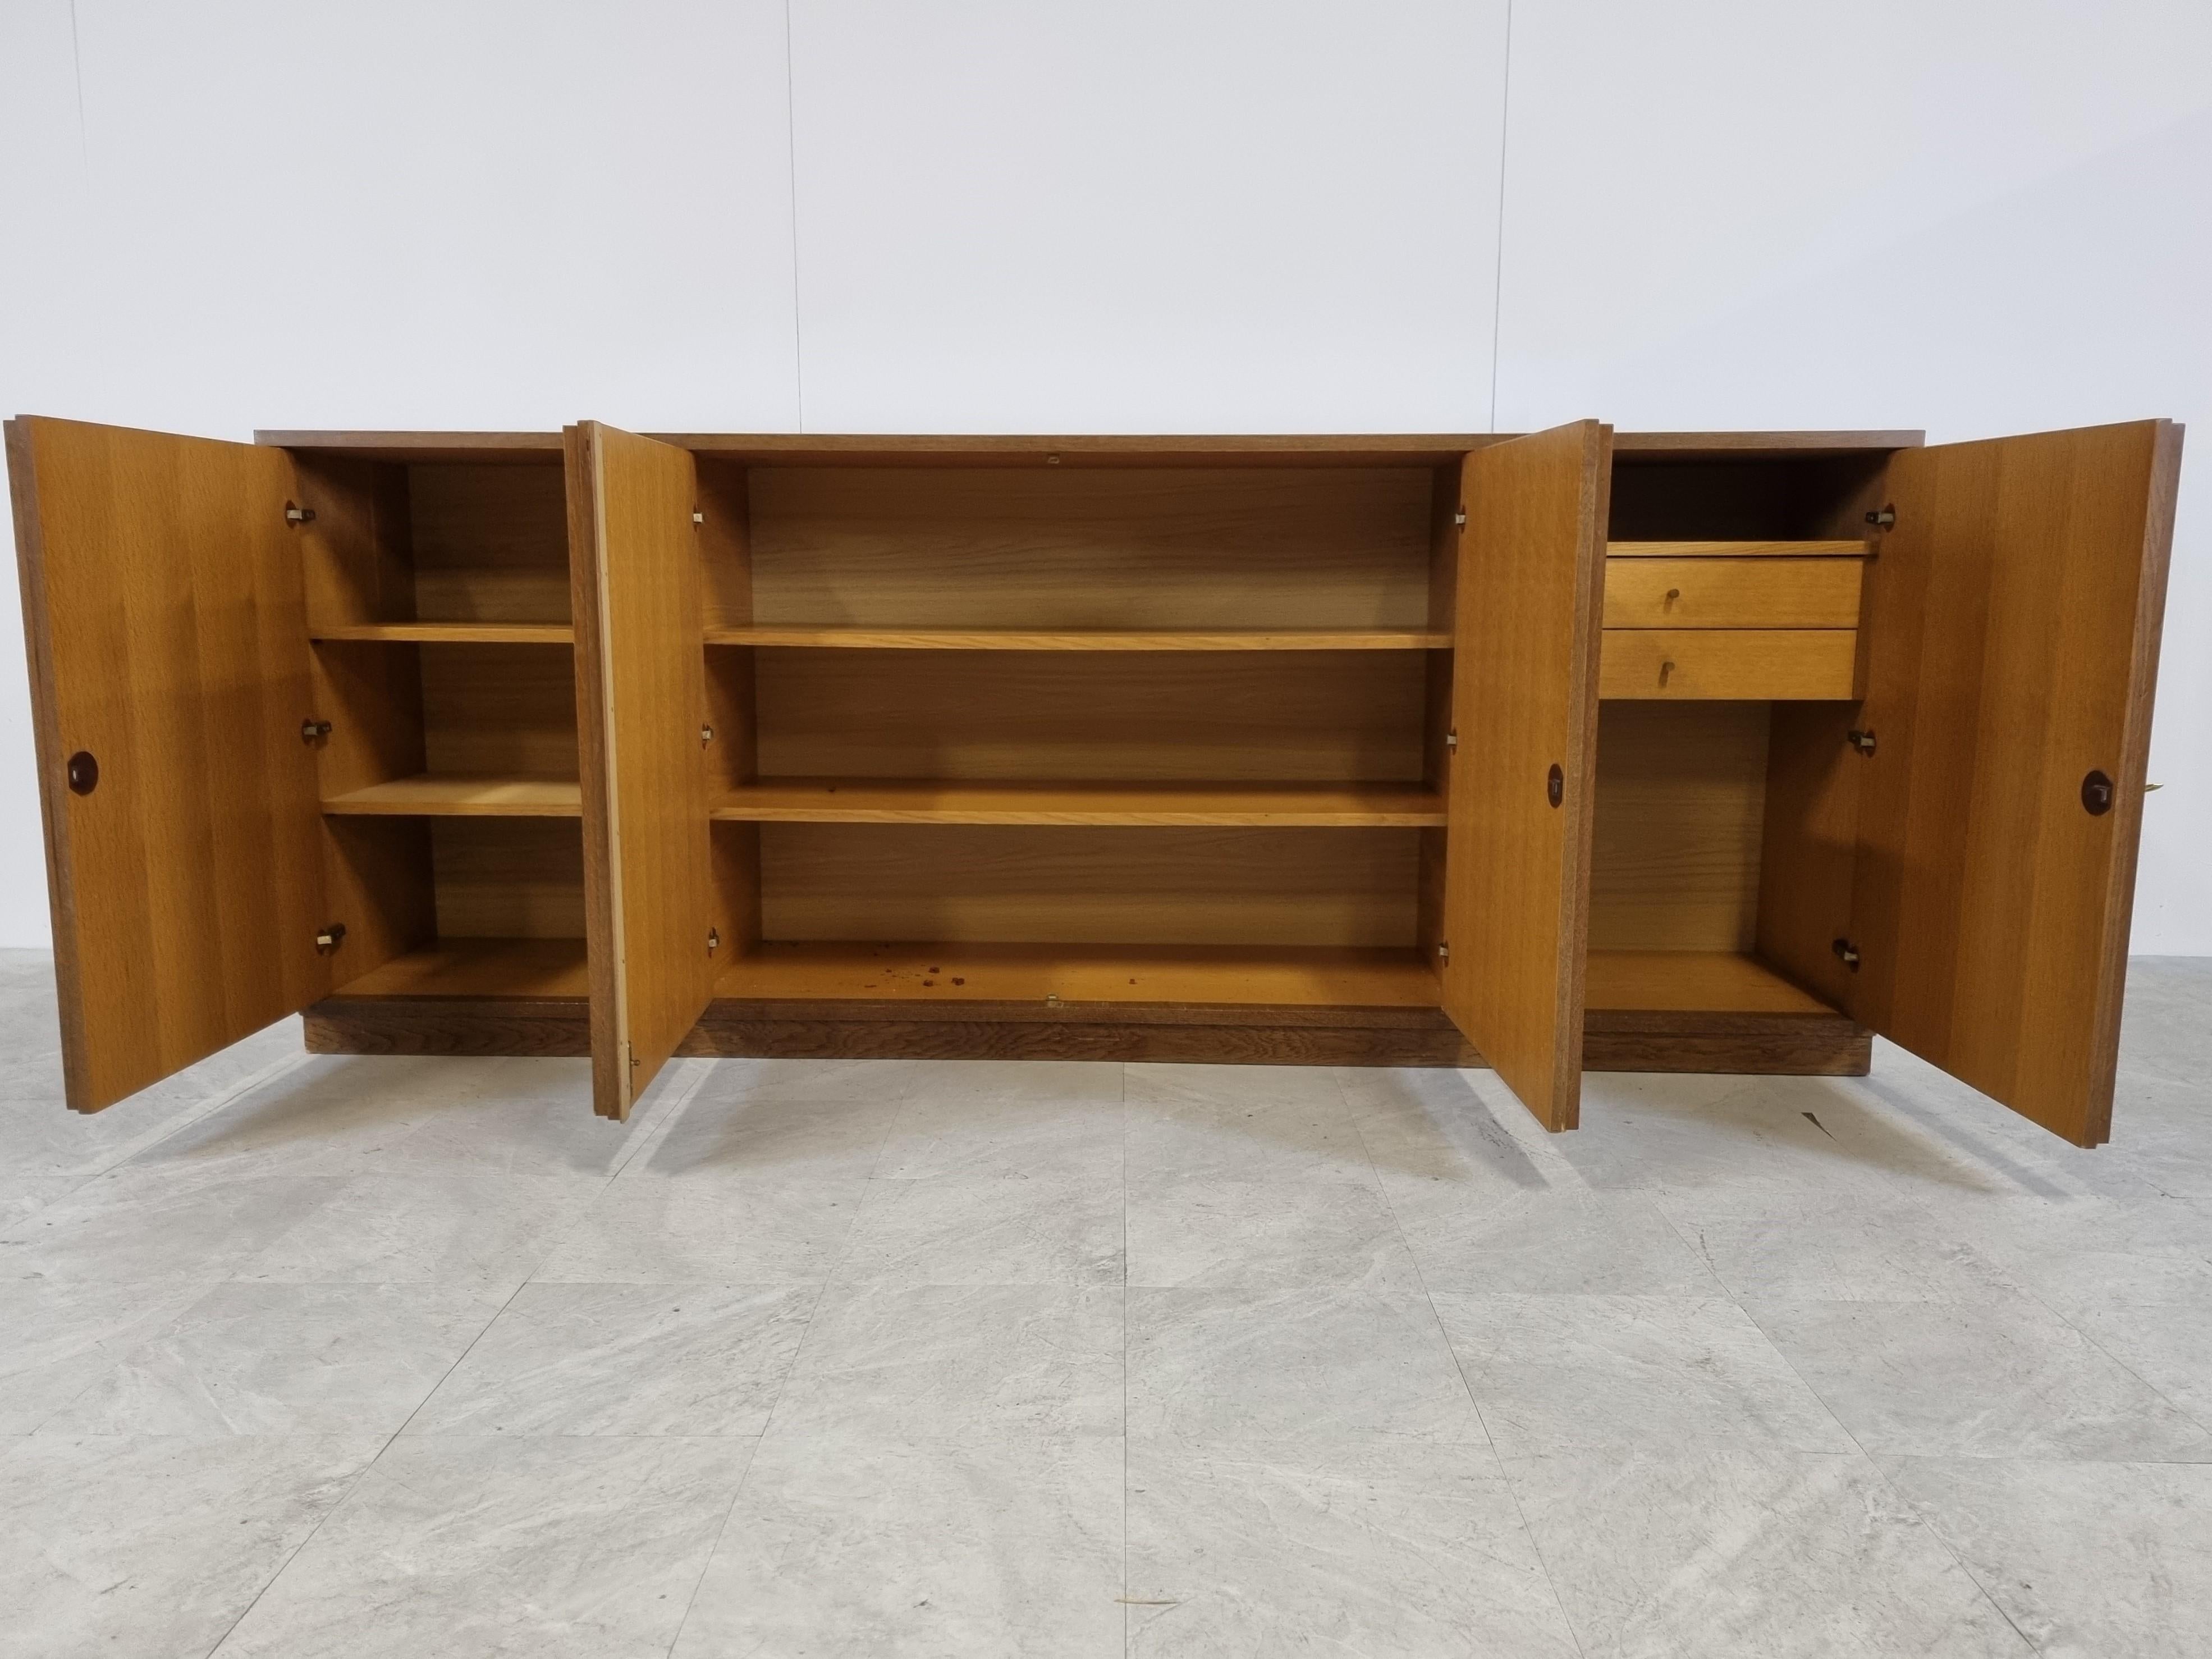 Brown brutalist two tone oak credenza with 4 graphical doors.

Beautiful timeless design and a real eye catcher for your living room.

This credenza provides plenty of storage space with two integrated drawers.

Good condition

1970s -